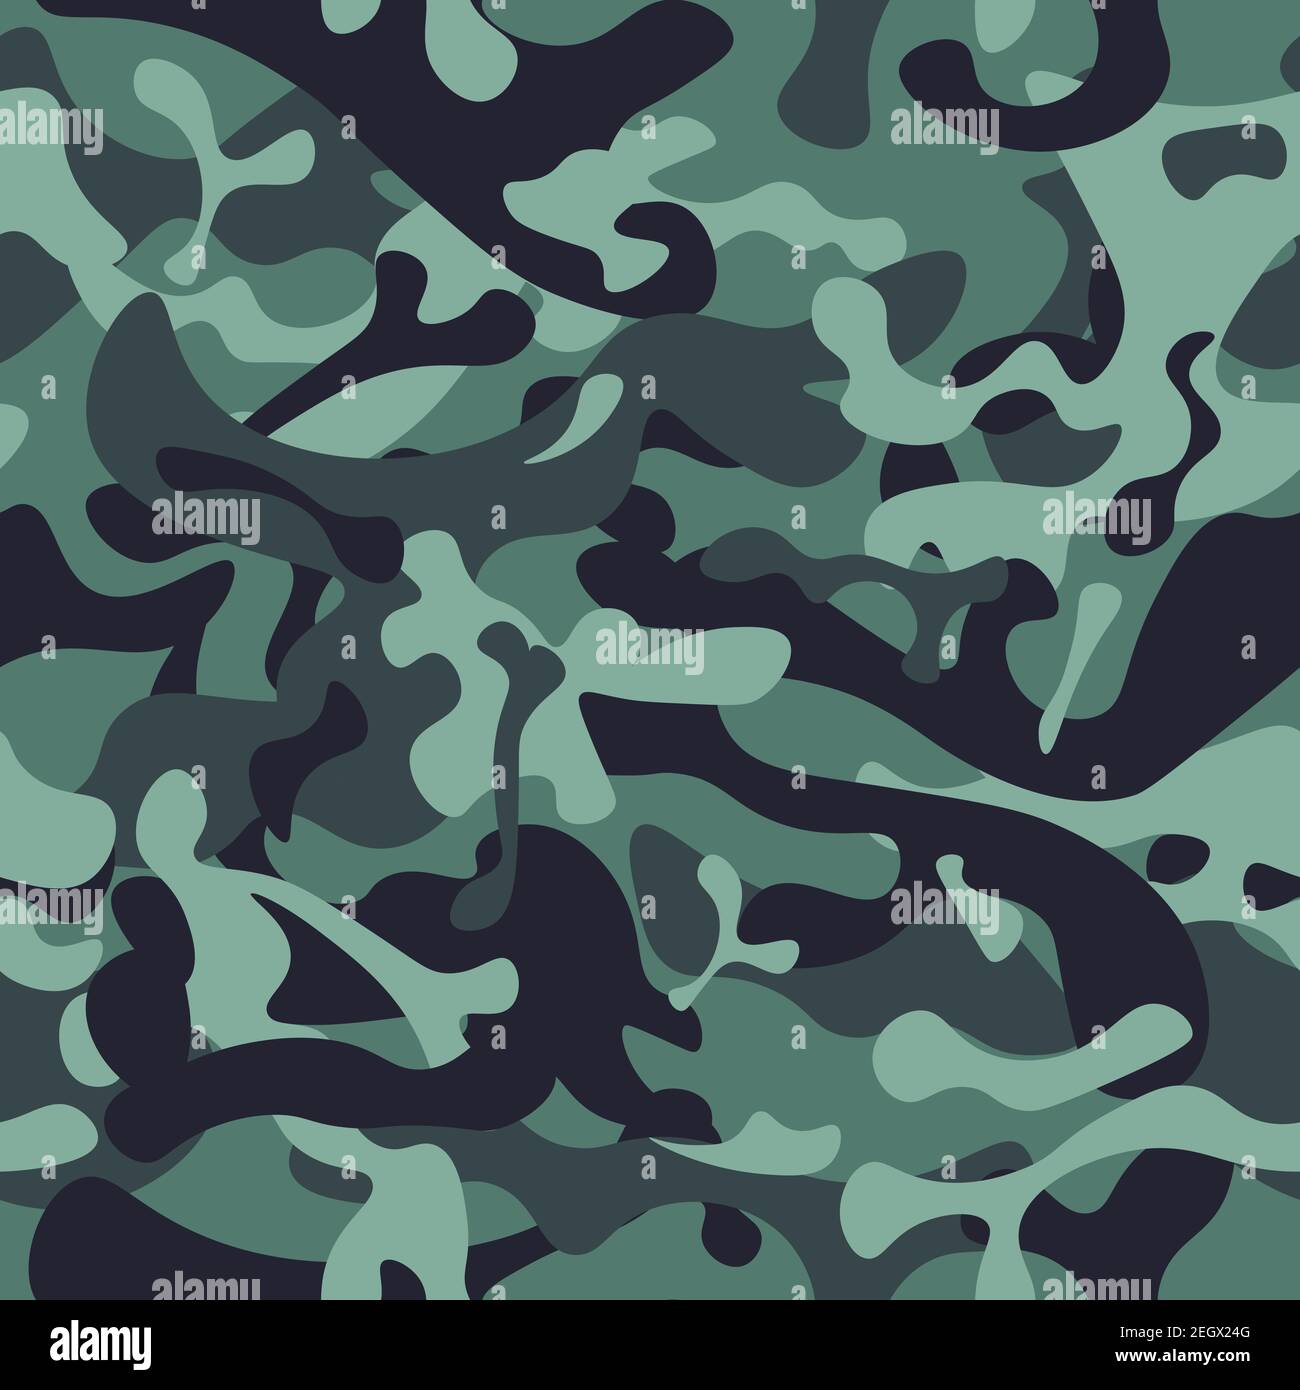 Winter camouflage seamless pattern background. Classic clothing and uniform design with blue and green elements. Soldier camo military vector. Stock Vector